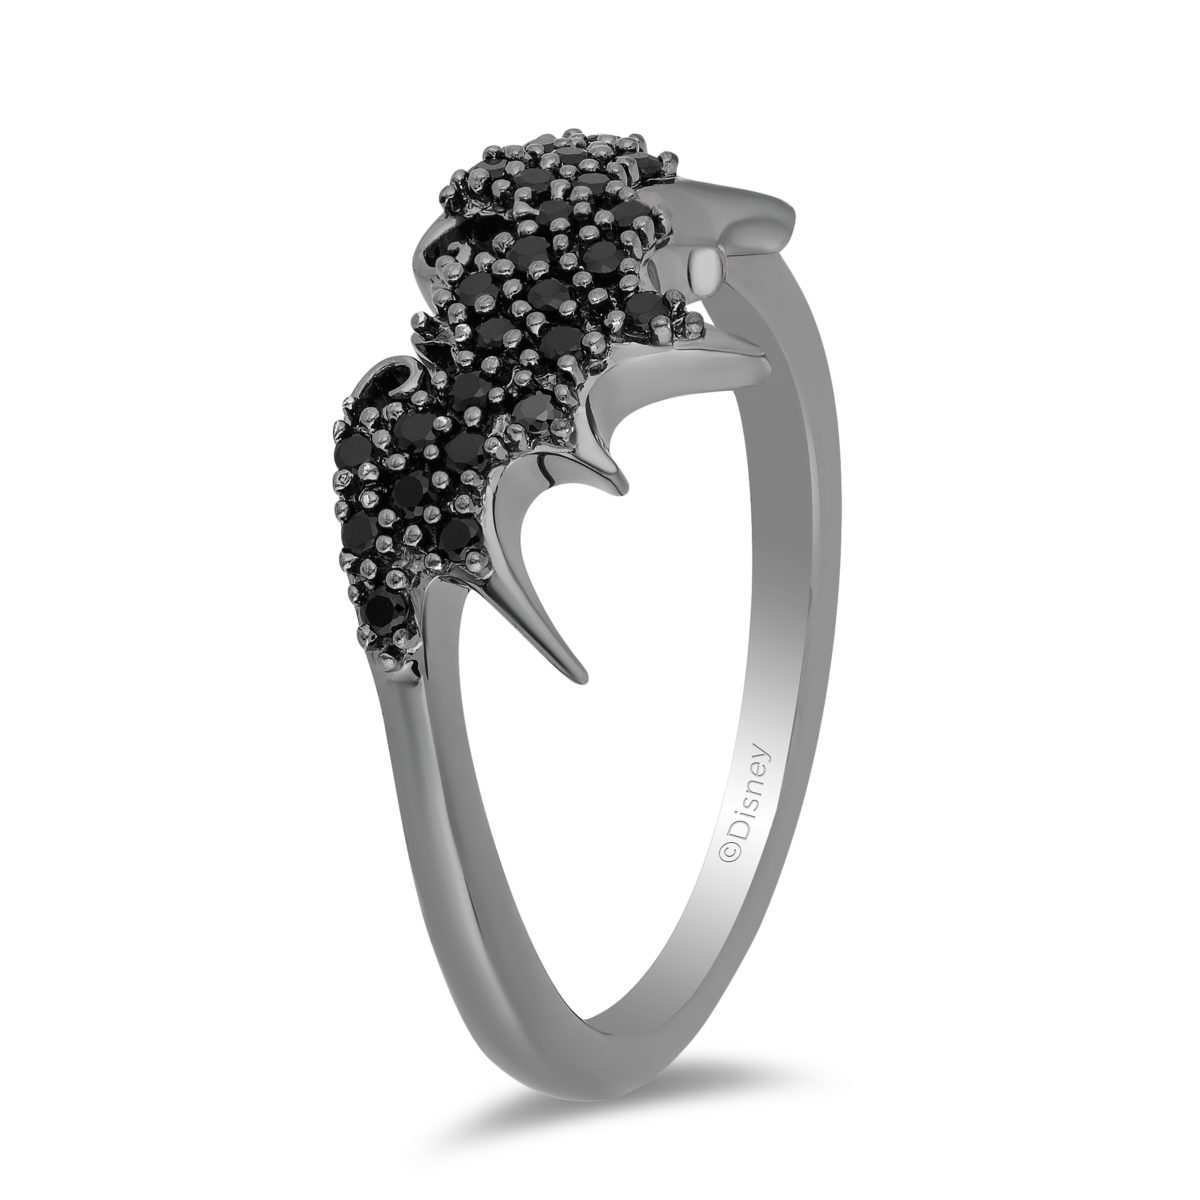 SHOP New "The Nightmare Before Christmas" Collection from Kay Jewelers